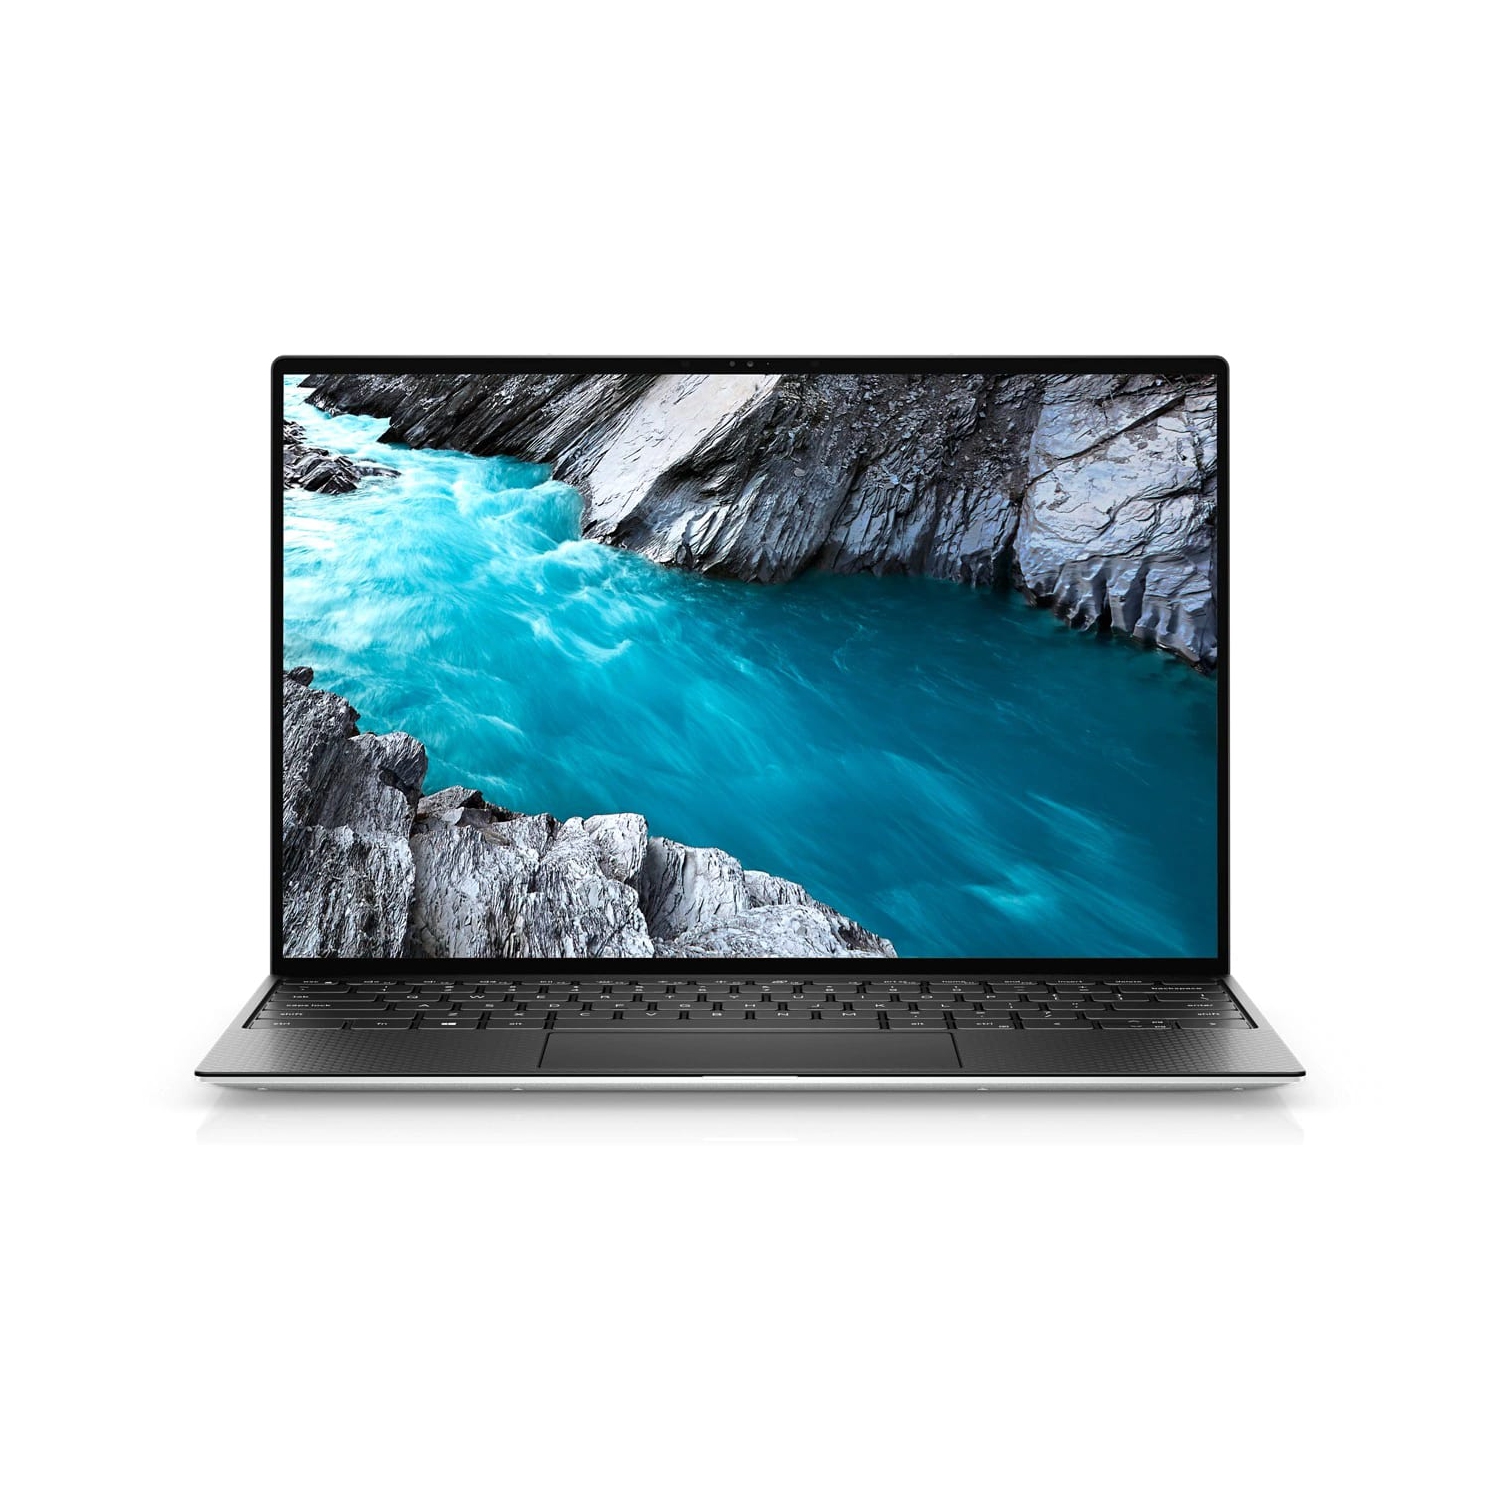 Refurbished (Excellent) - Dell XPS 13 9310 Laptop (2020) | 13.4" FHD+ Touch | Core i5 - 256GB SSD - 8GB RAM | 4 Cores @ 4.2 GHz - 11th Gen CPU Certified Refurbished